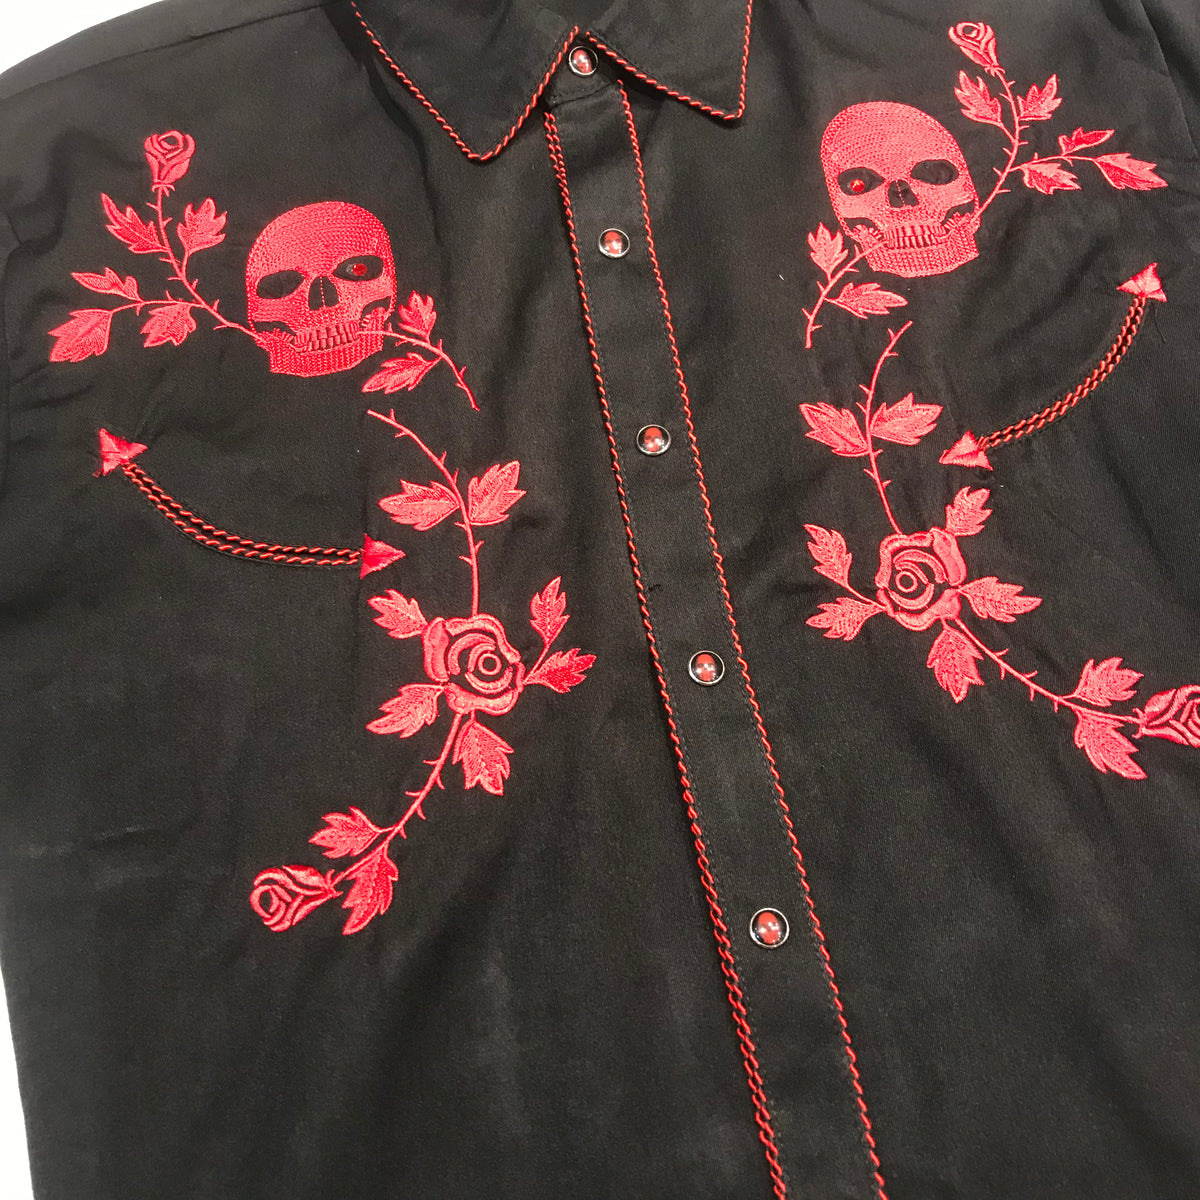 Scully Red Skull Western Long Sleeve Shirt - Dudes Boutique